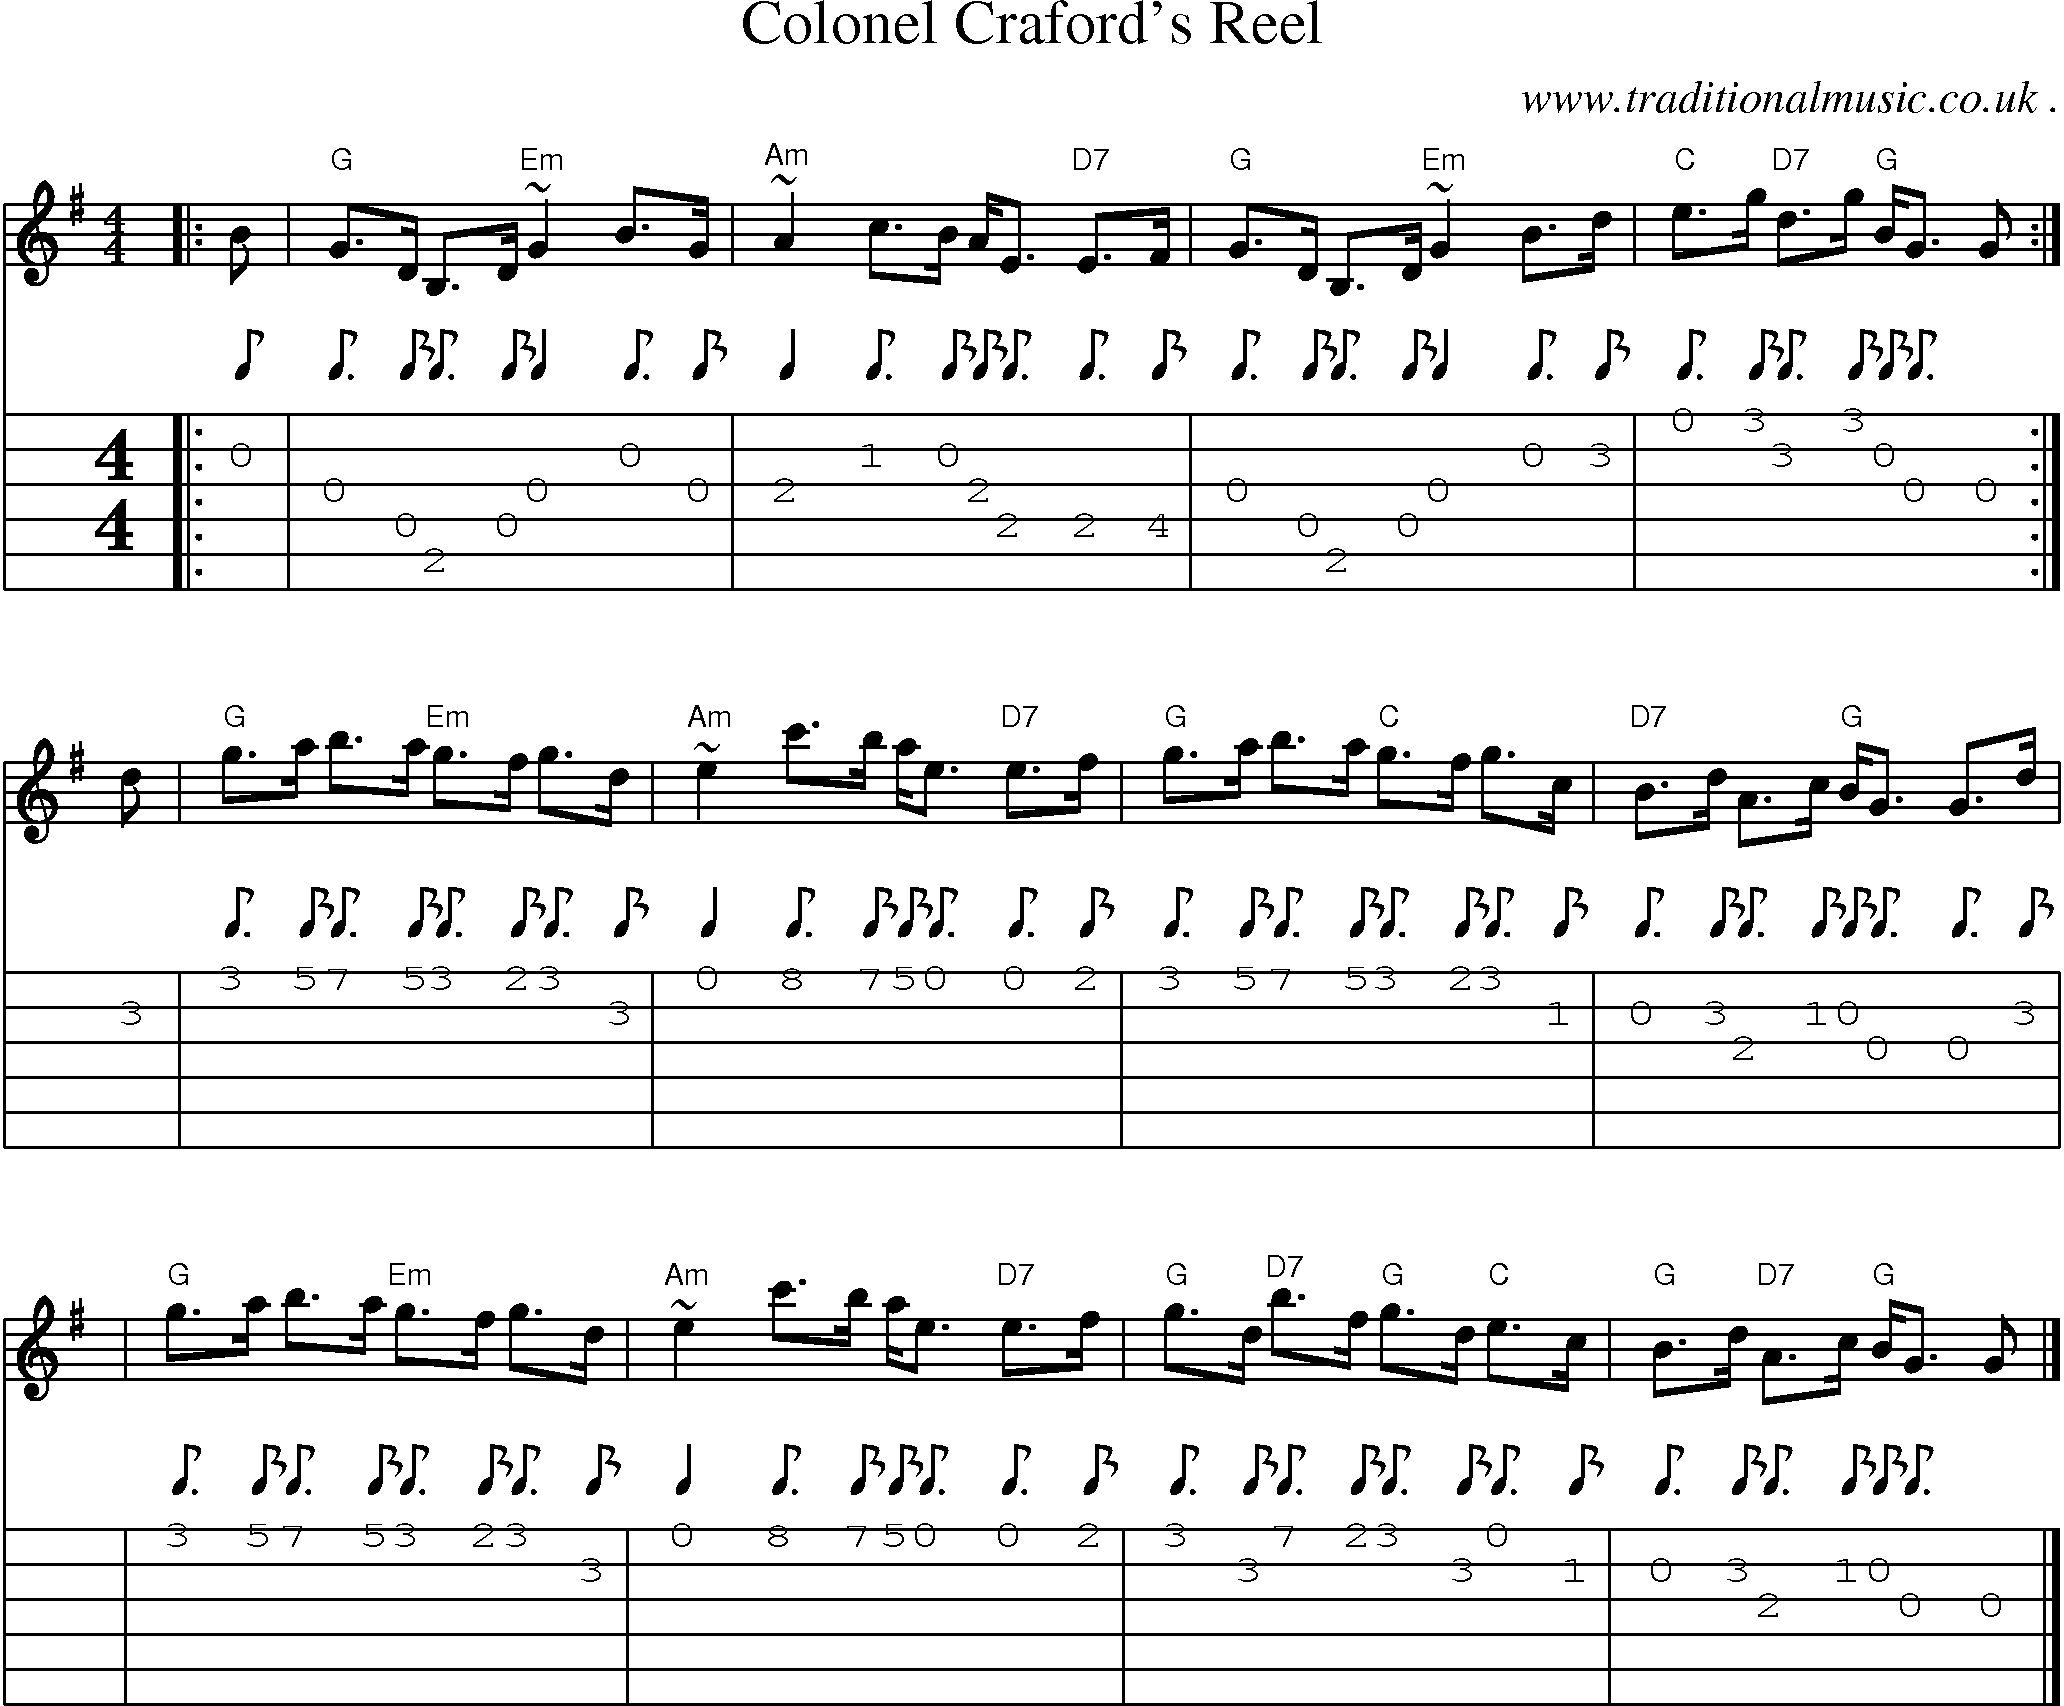 Sheet-music  score, Chords and Guitar Tabs for Colonel Crafords Reel